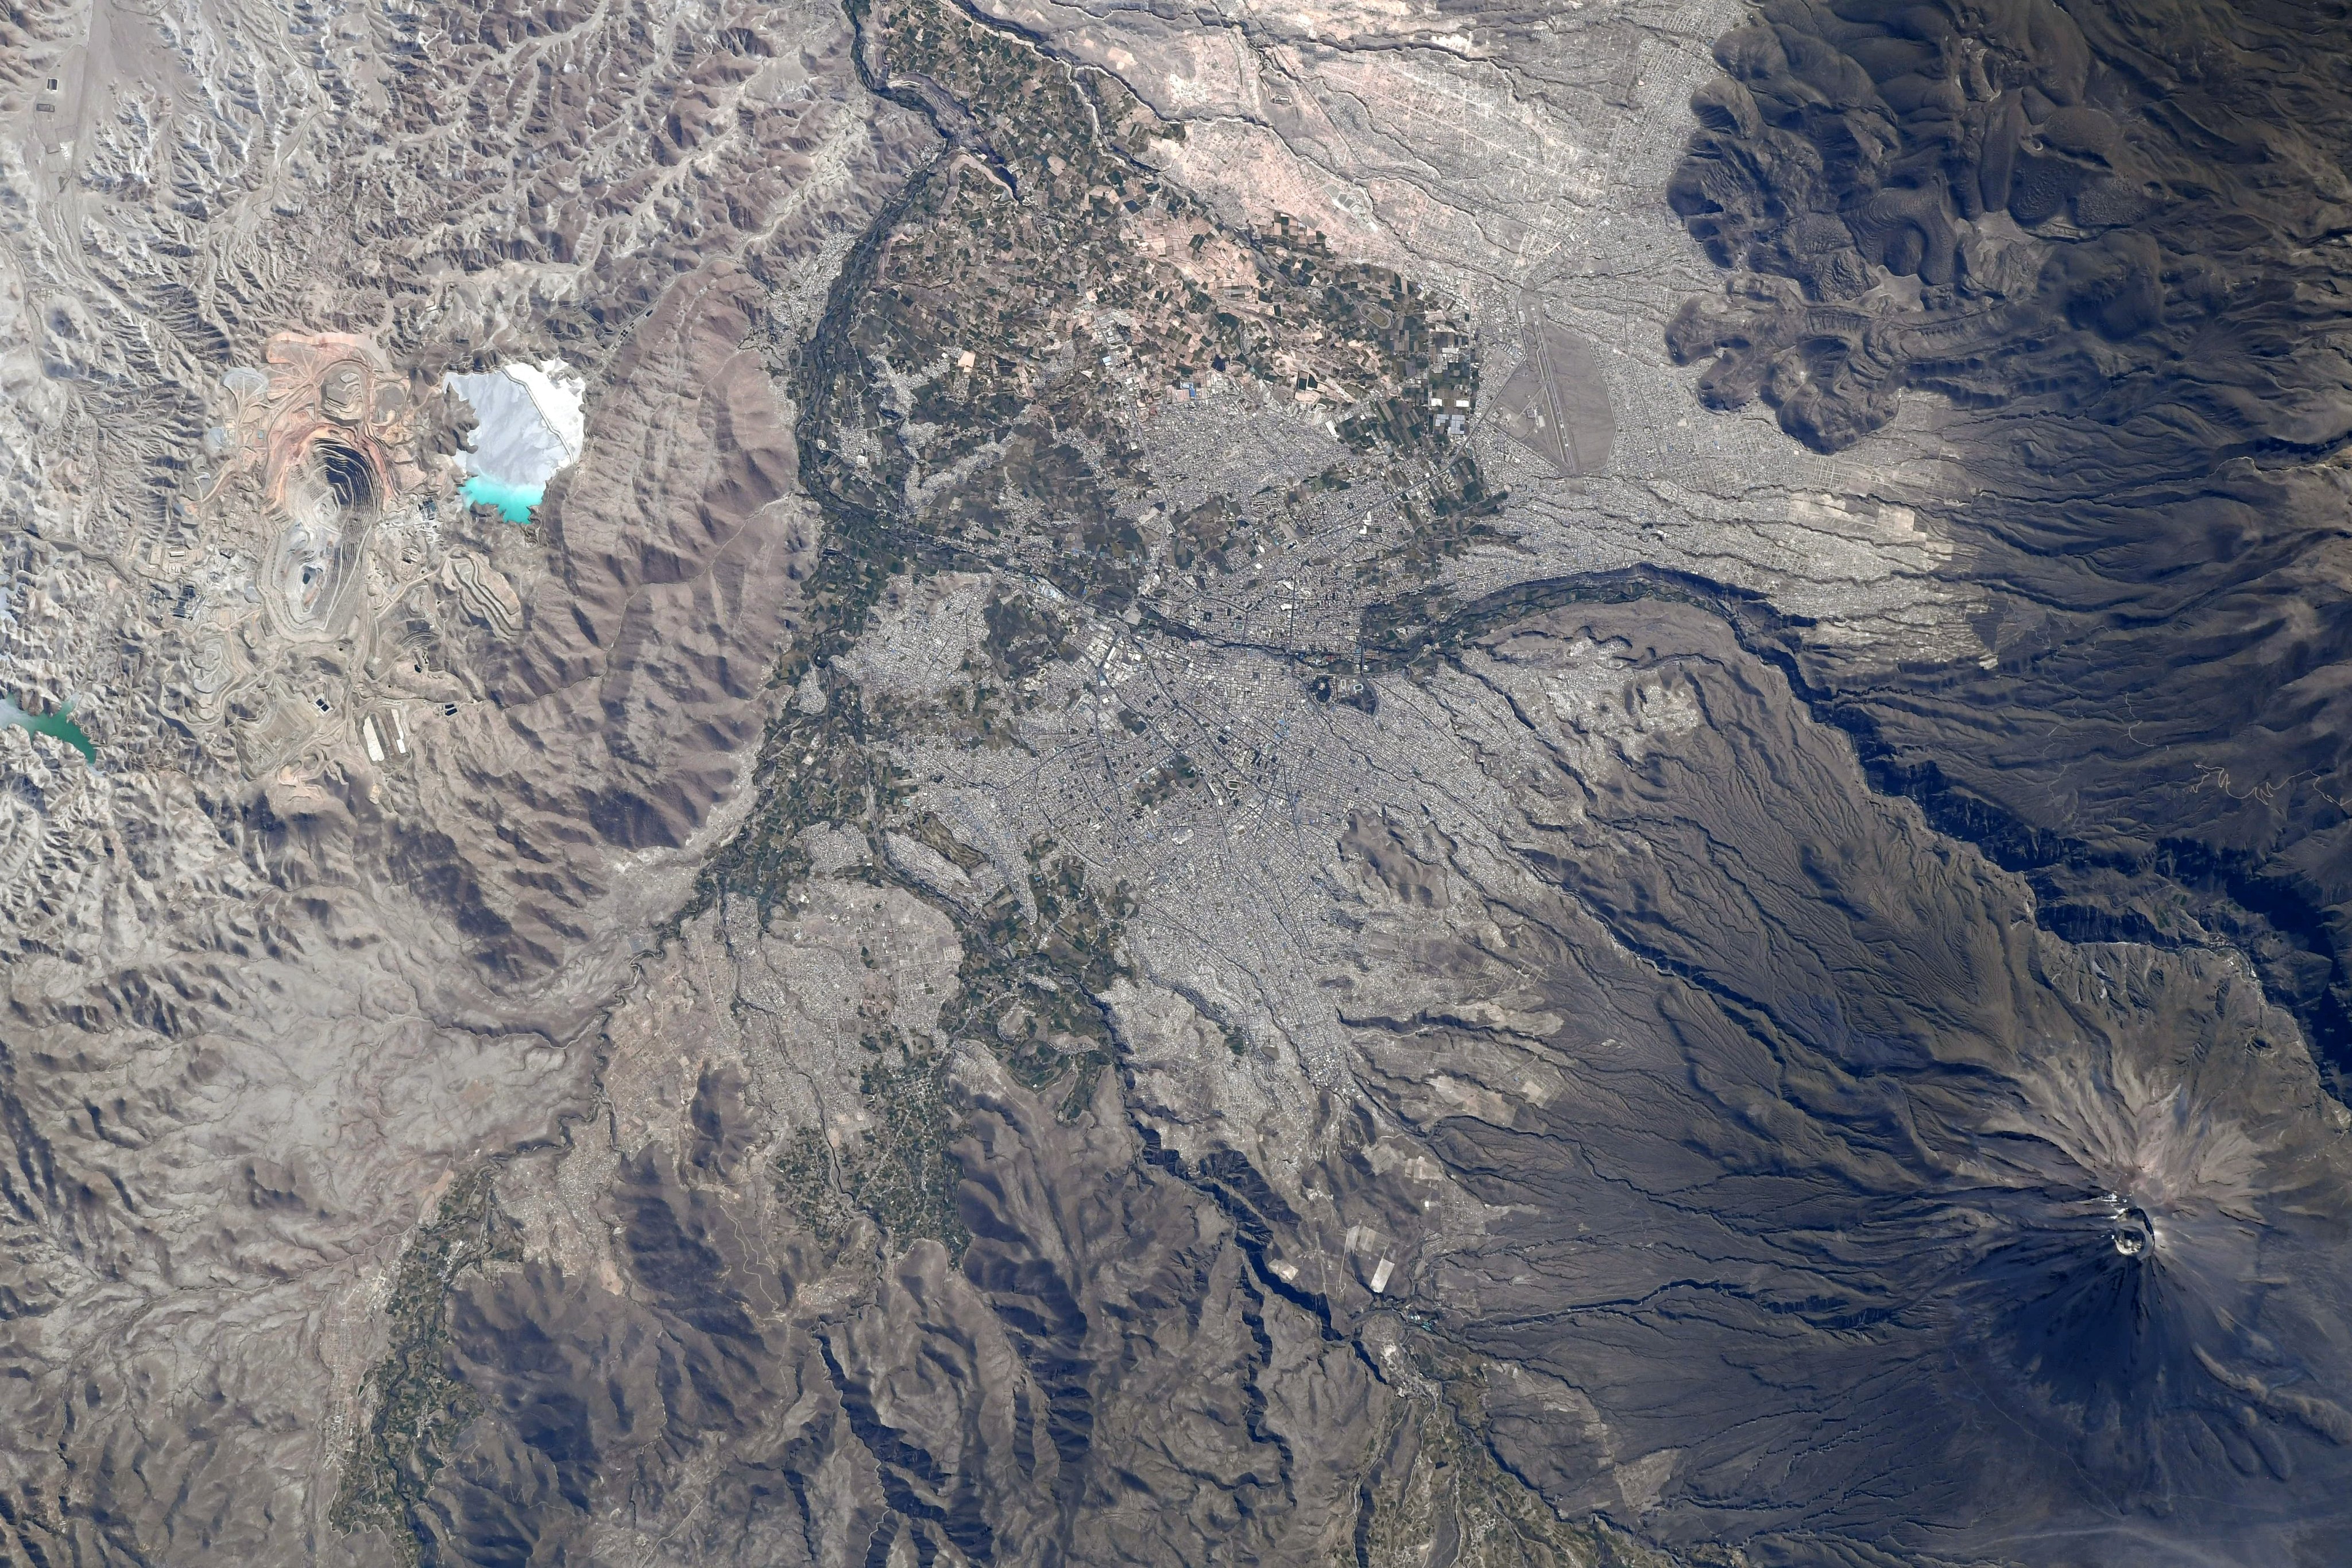 This is how Peru's Ubinas volcano looks from space